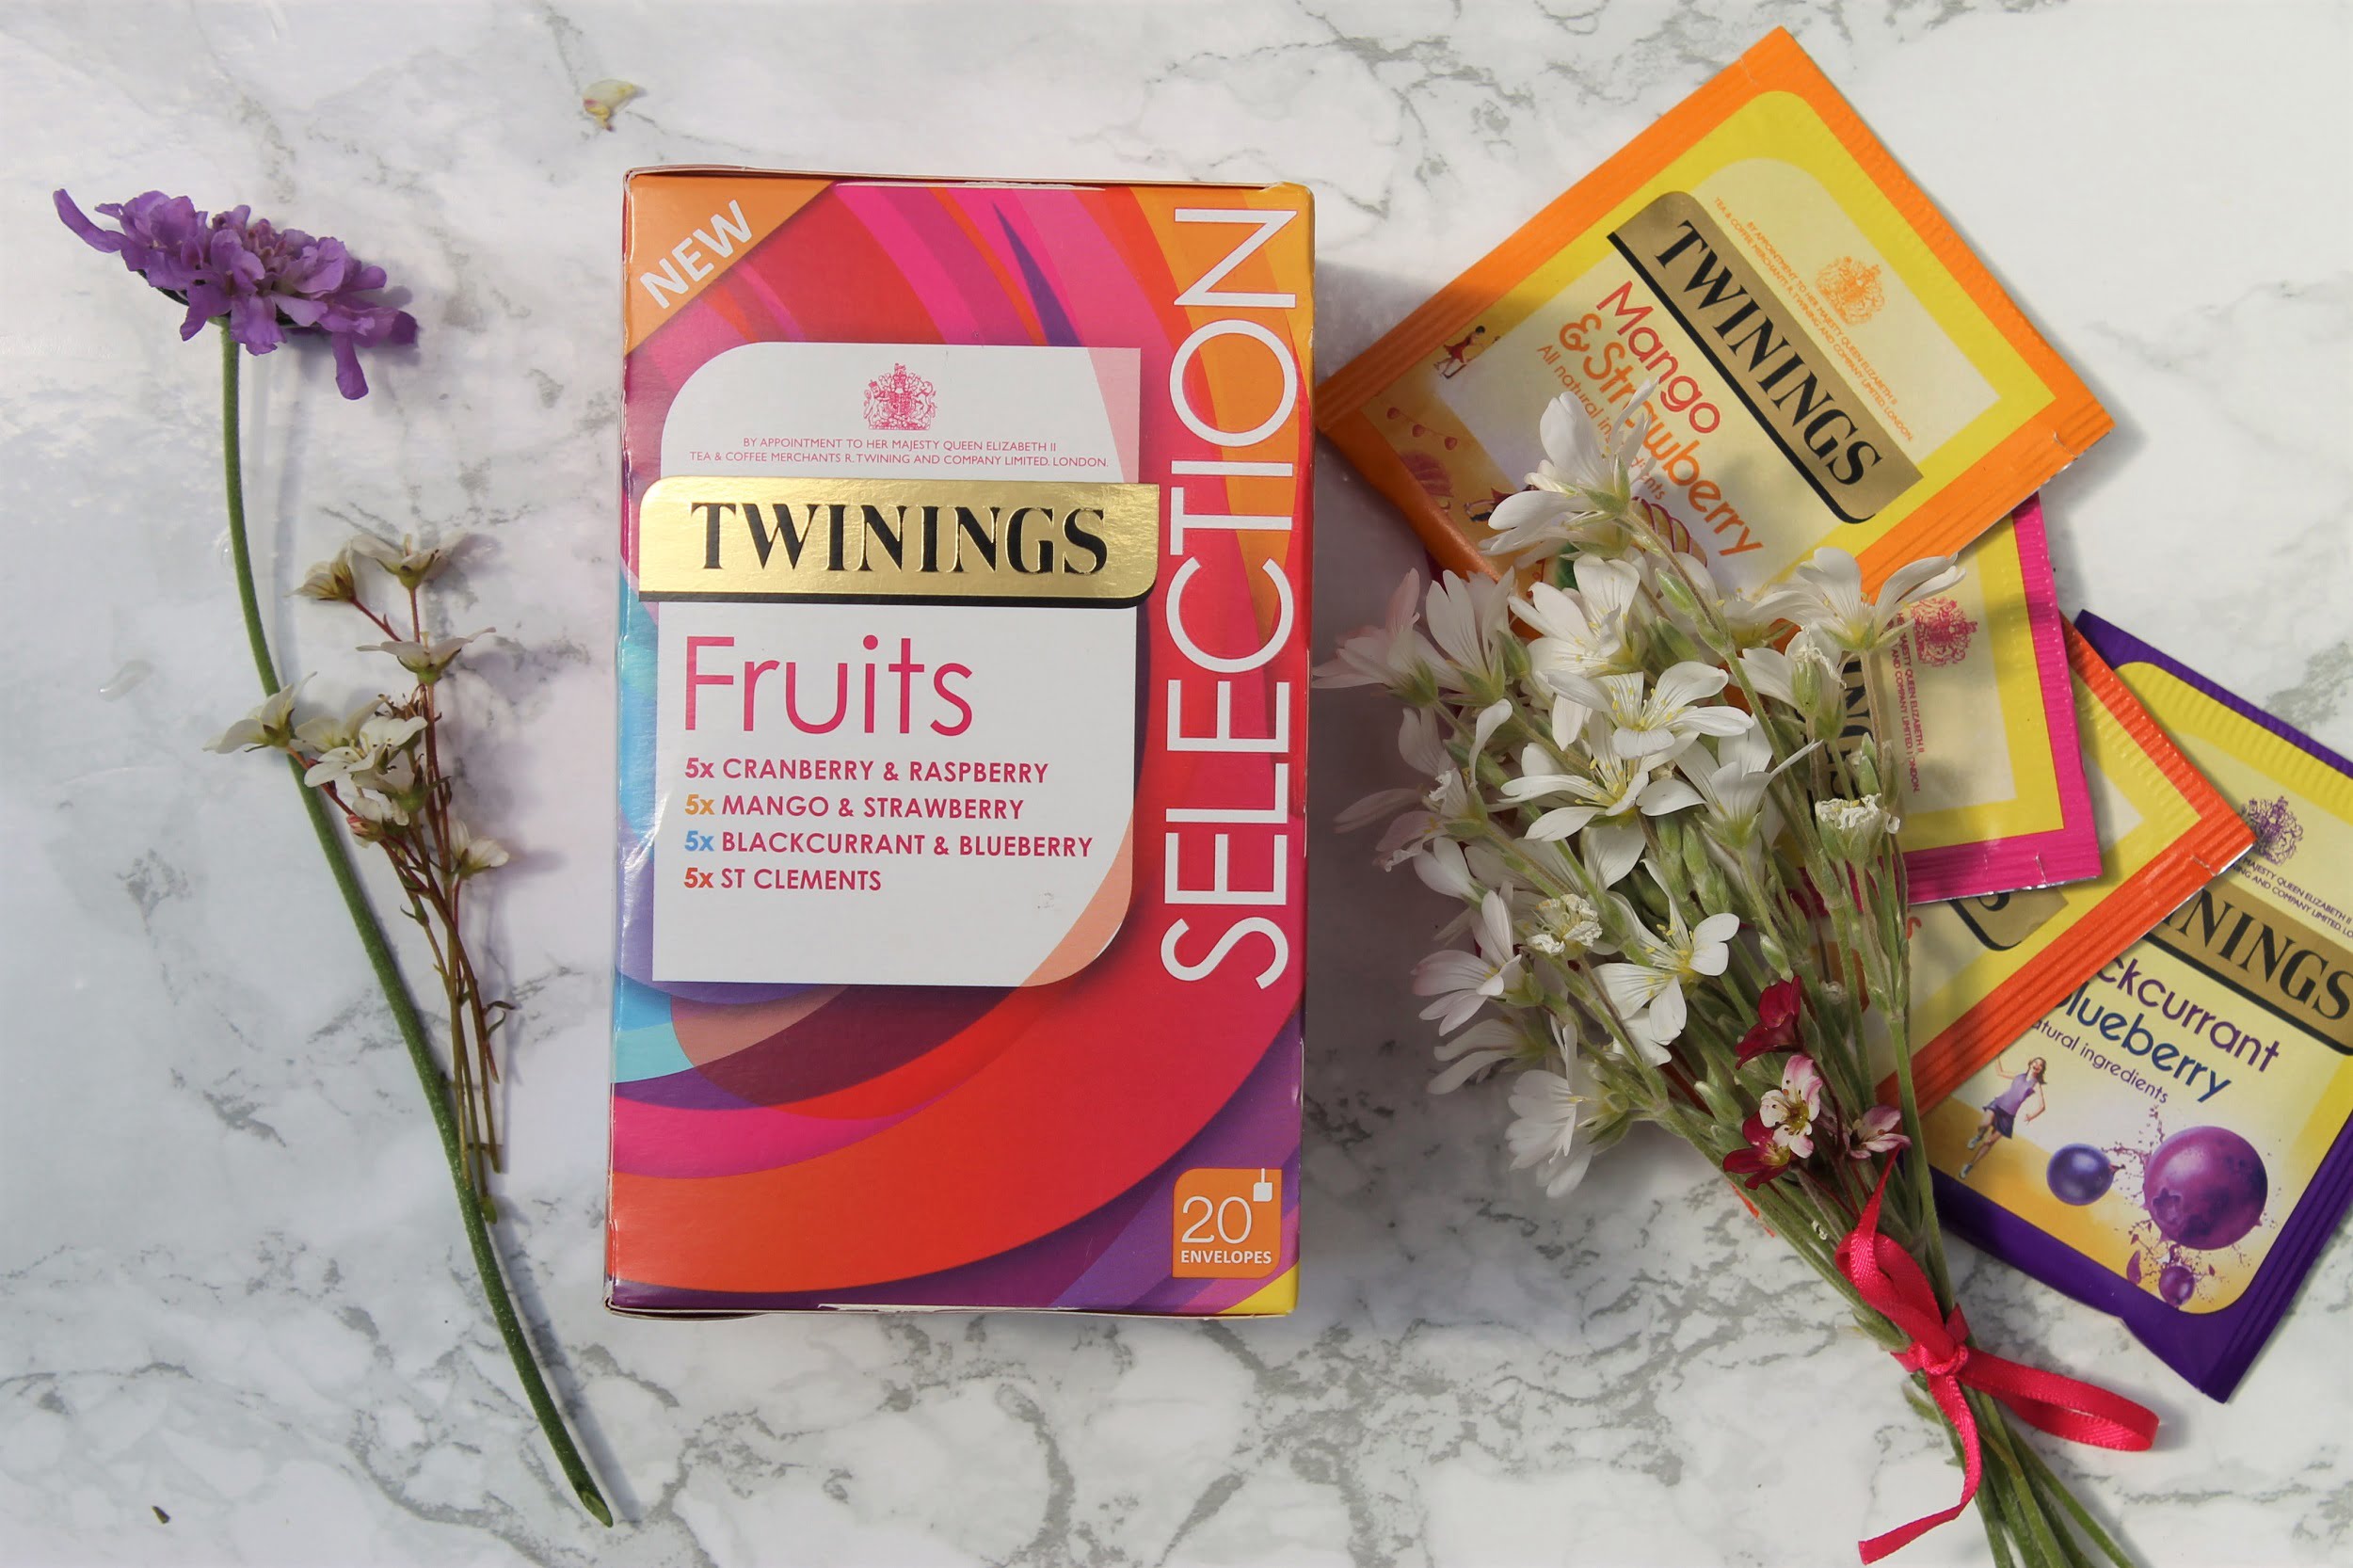 Twinings Fruits Selection Box Review